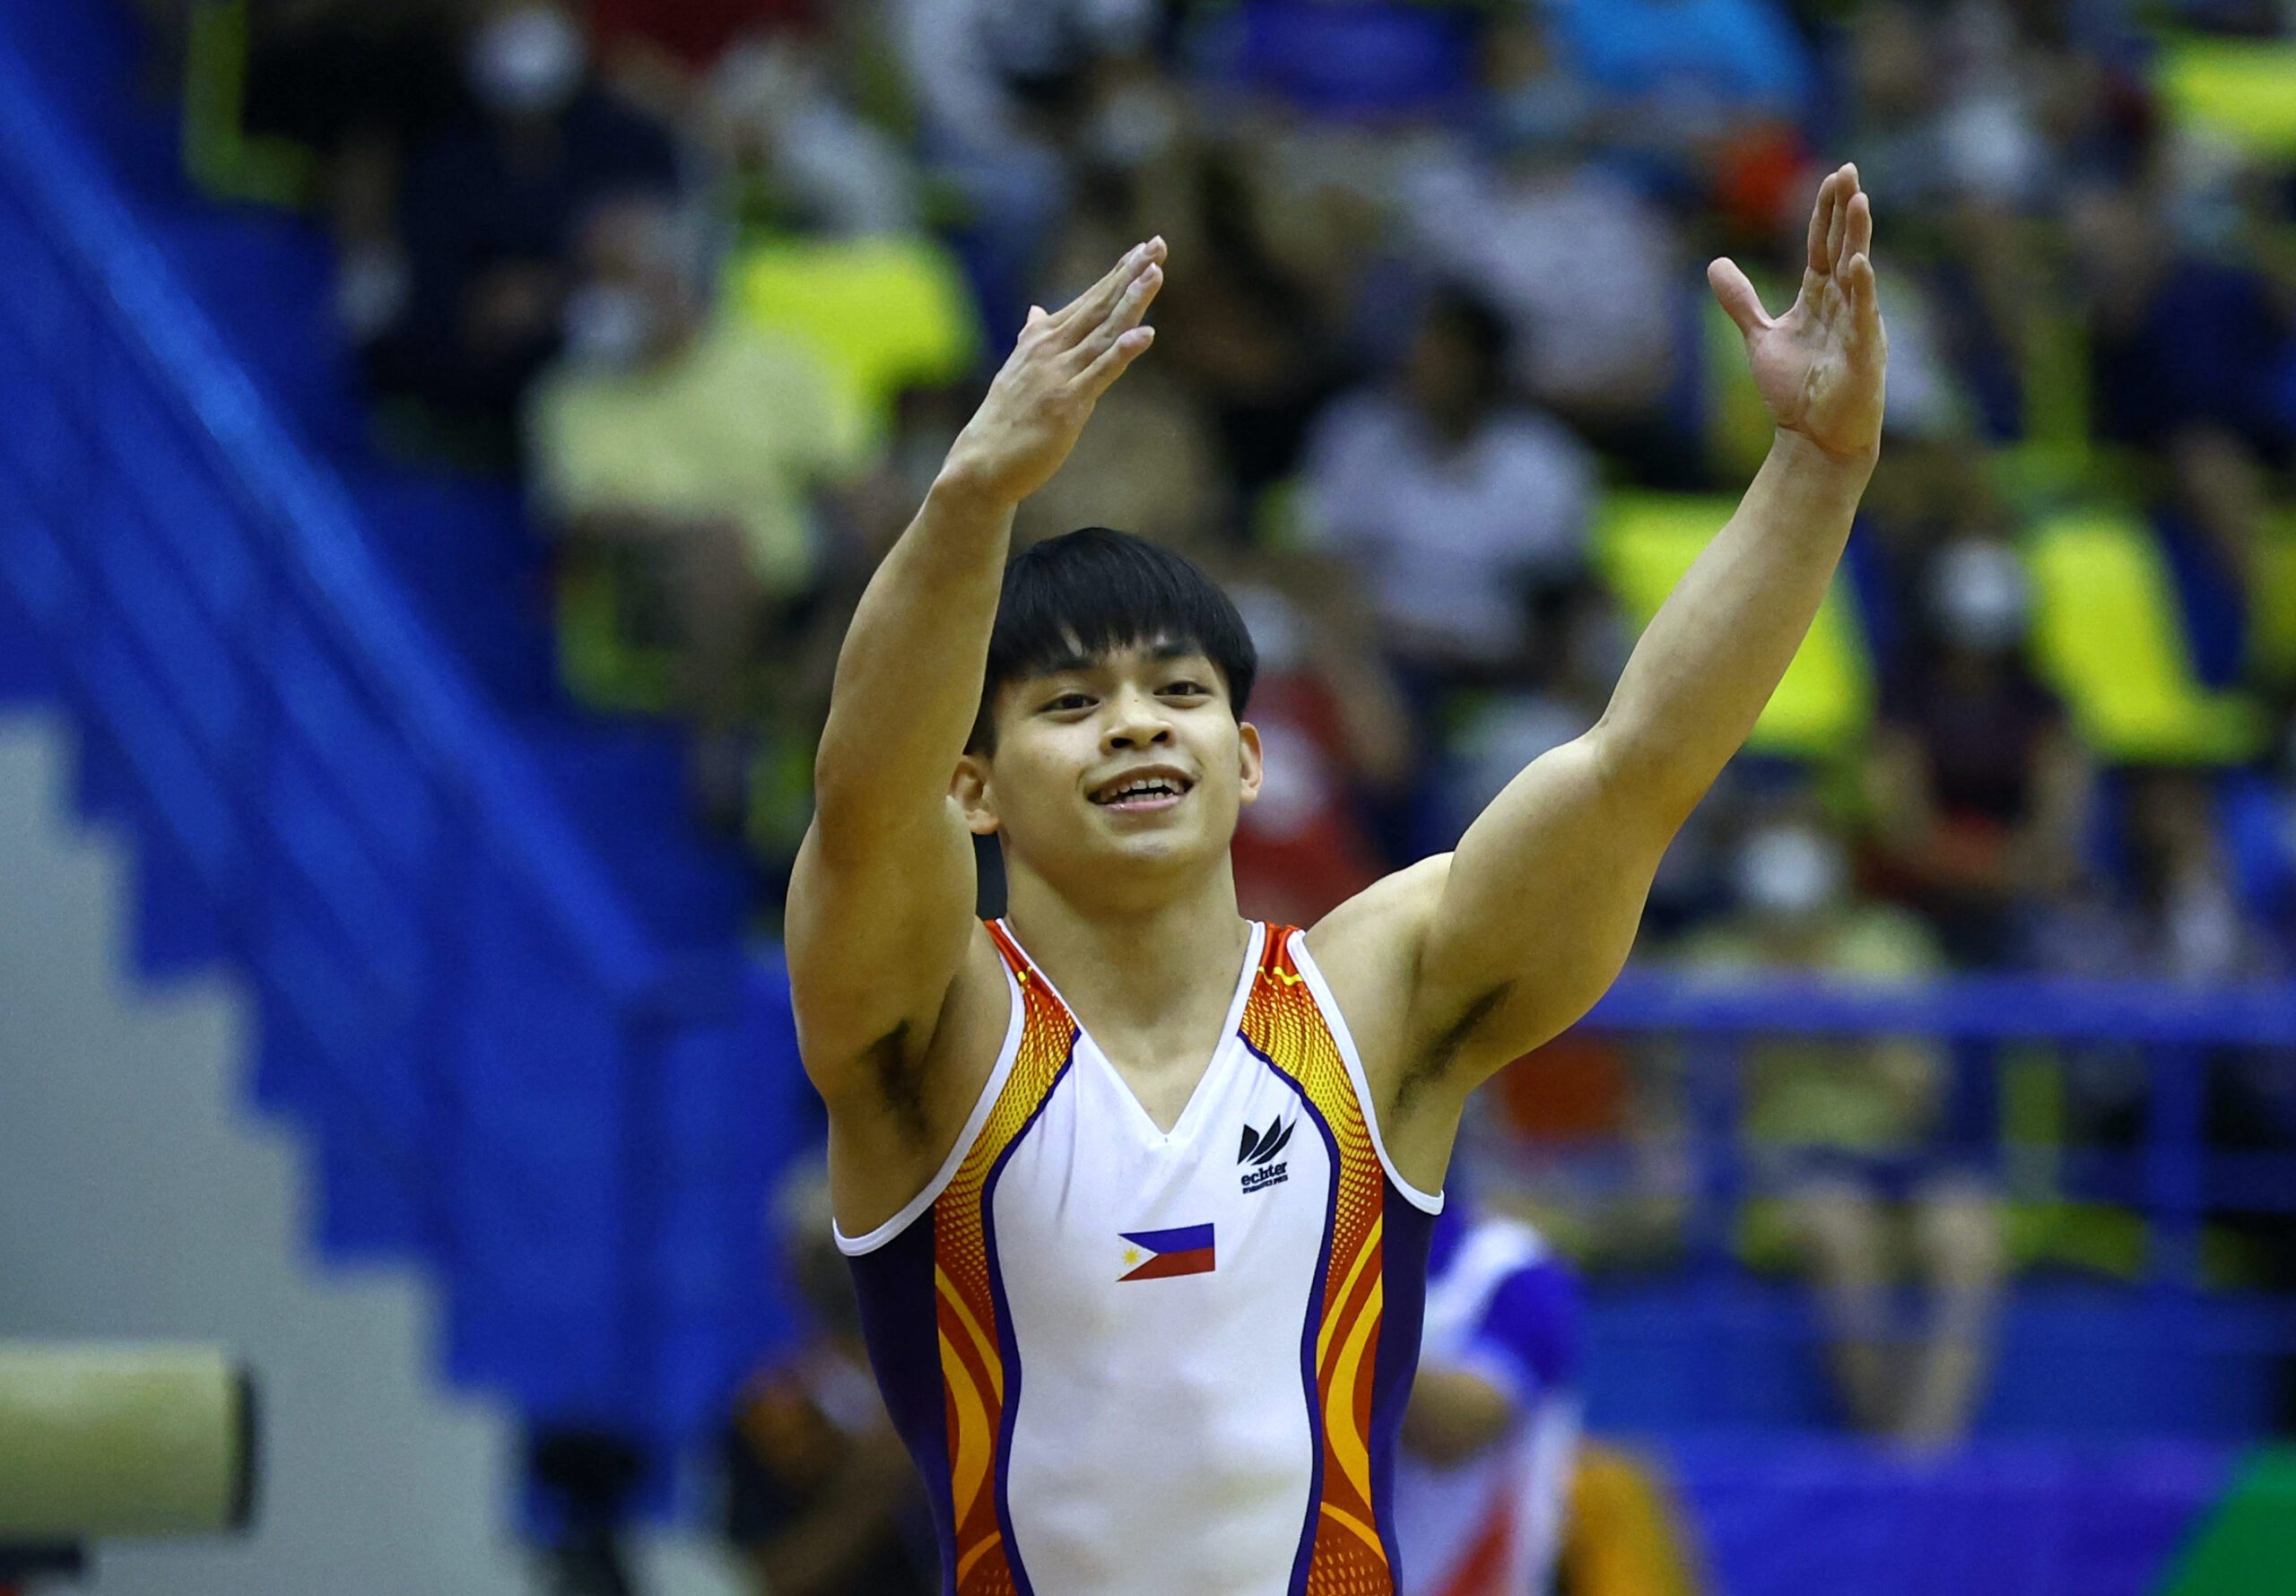 Carlos Yulo tops horizontal bar to wrap up SEA Games stint with 5 golds